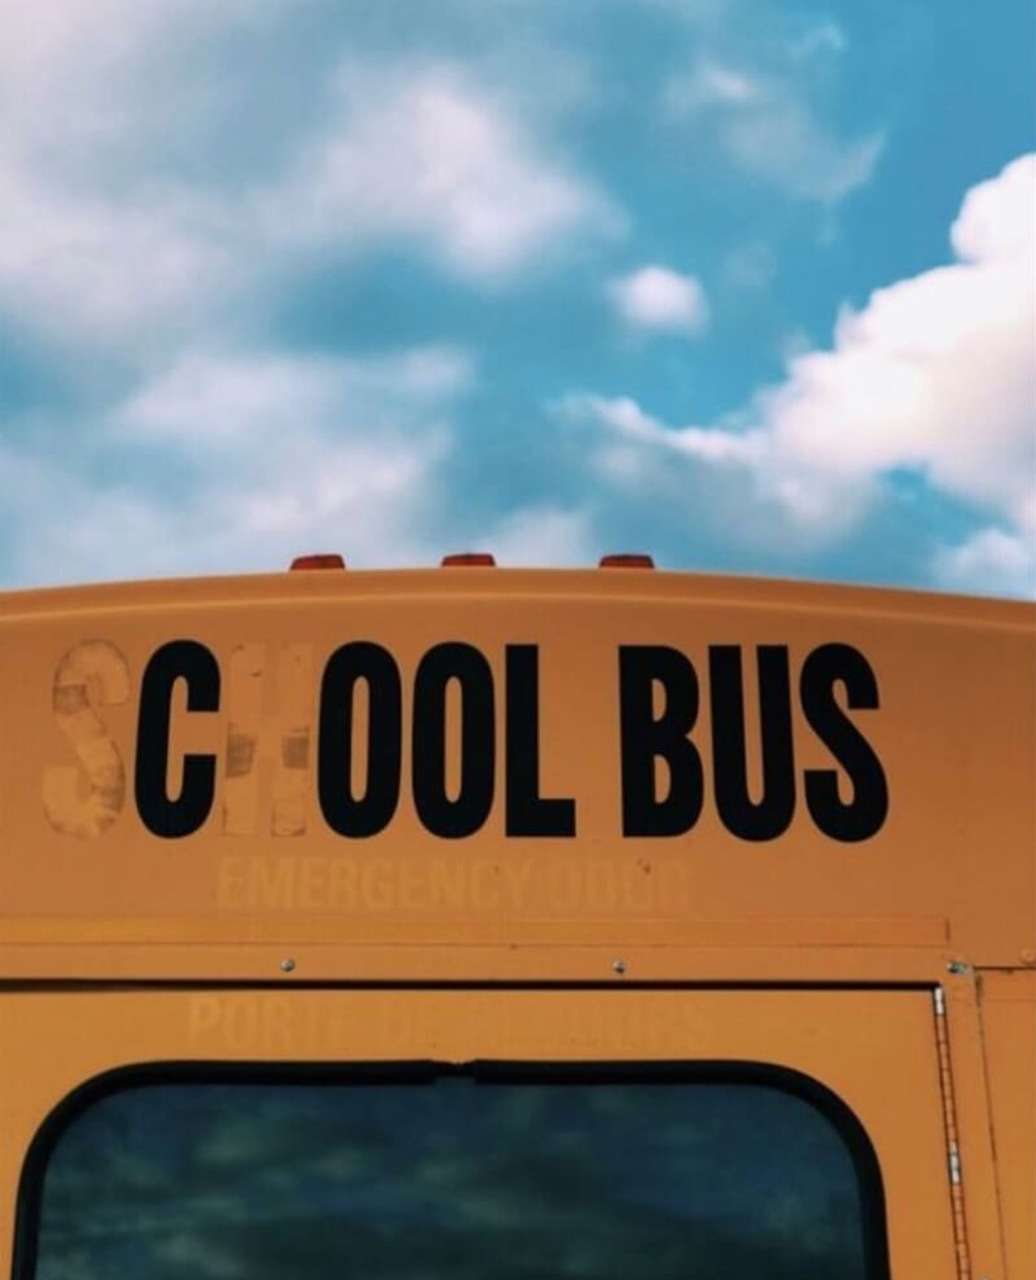 Aesthetic, Yellow, And Bus Image - Vsco Bus - HD Wallpaper 